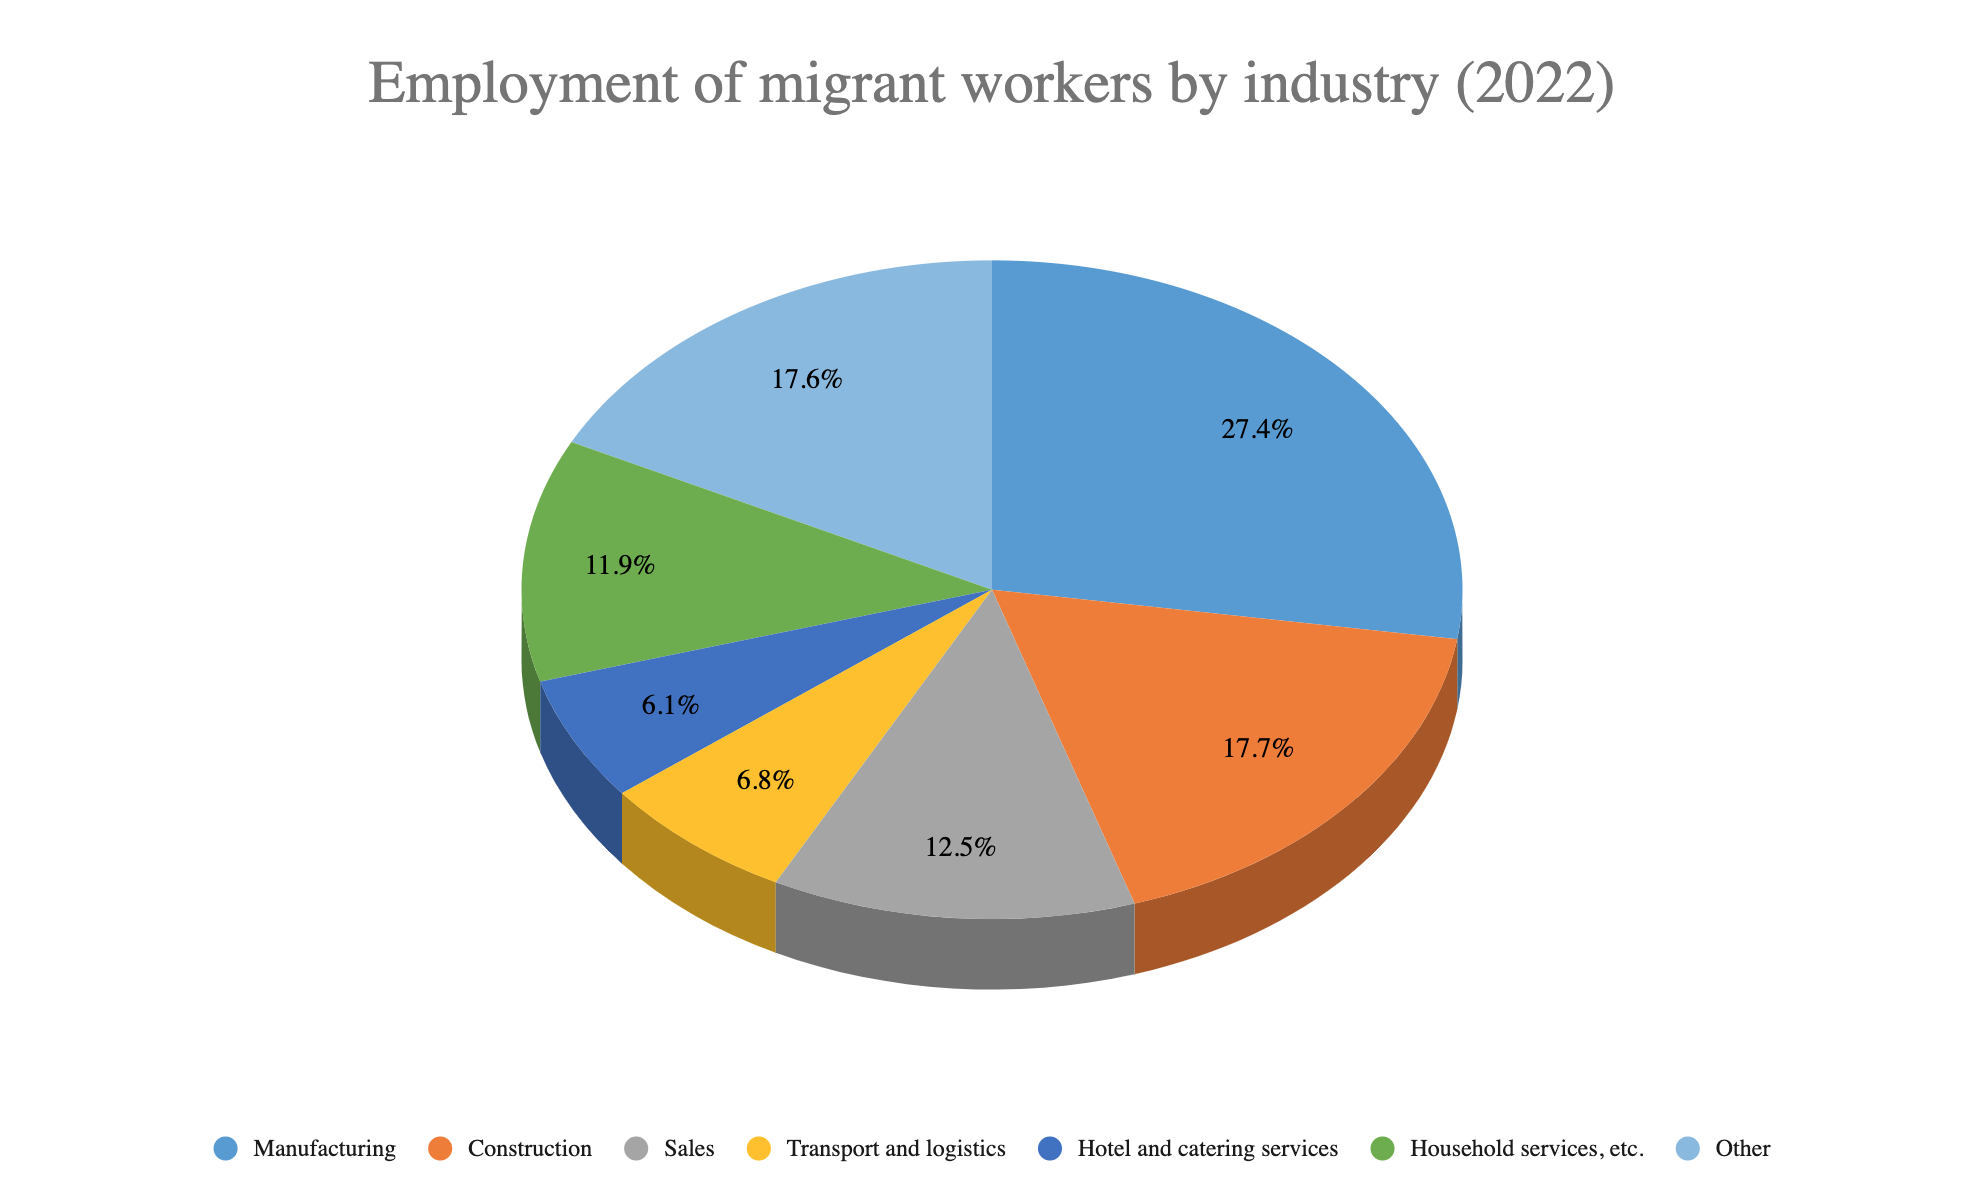 A CLB chart shows the employment distribution of migrant workers in 2022 according to industry